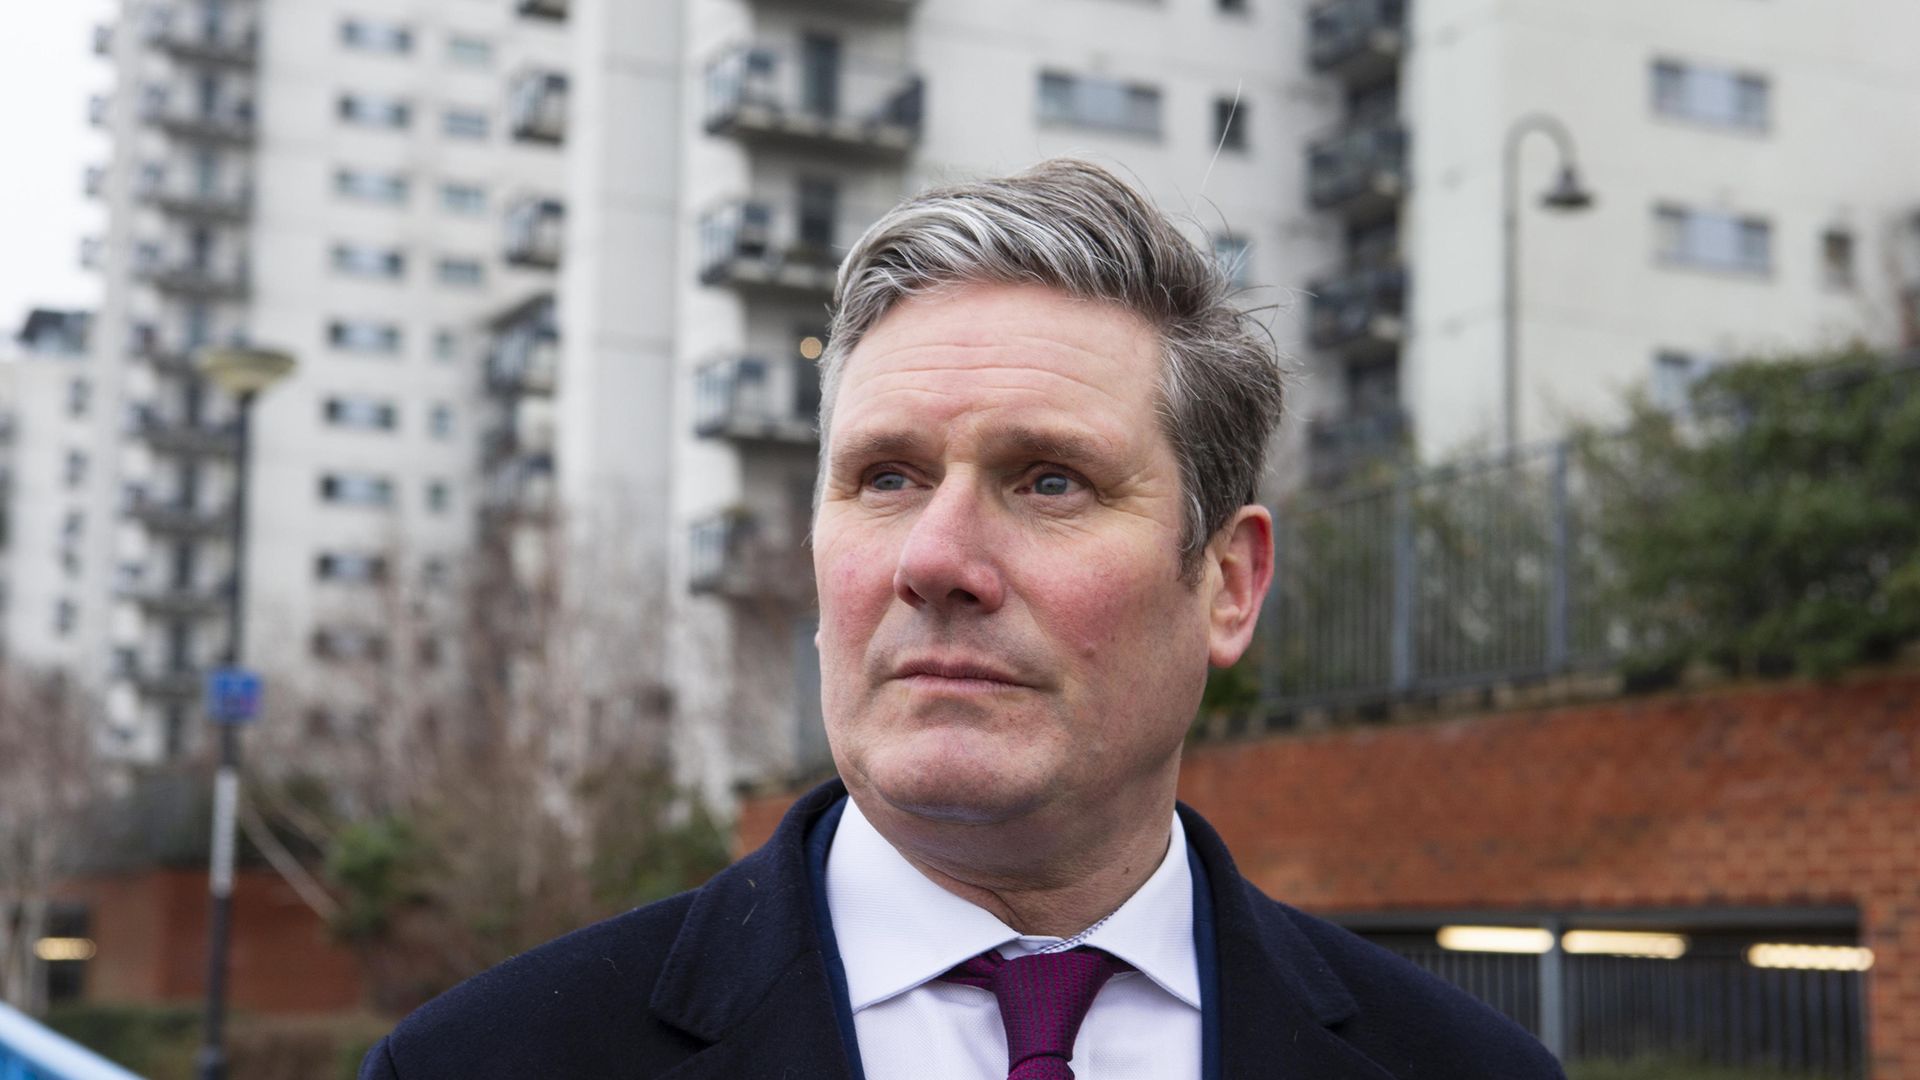 Labour leader Sir Keir Starmer during a visit to Albert House, Woolwich, London - Credit: PA